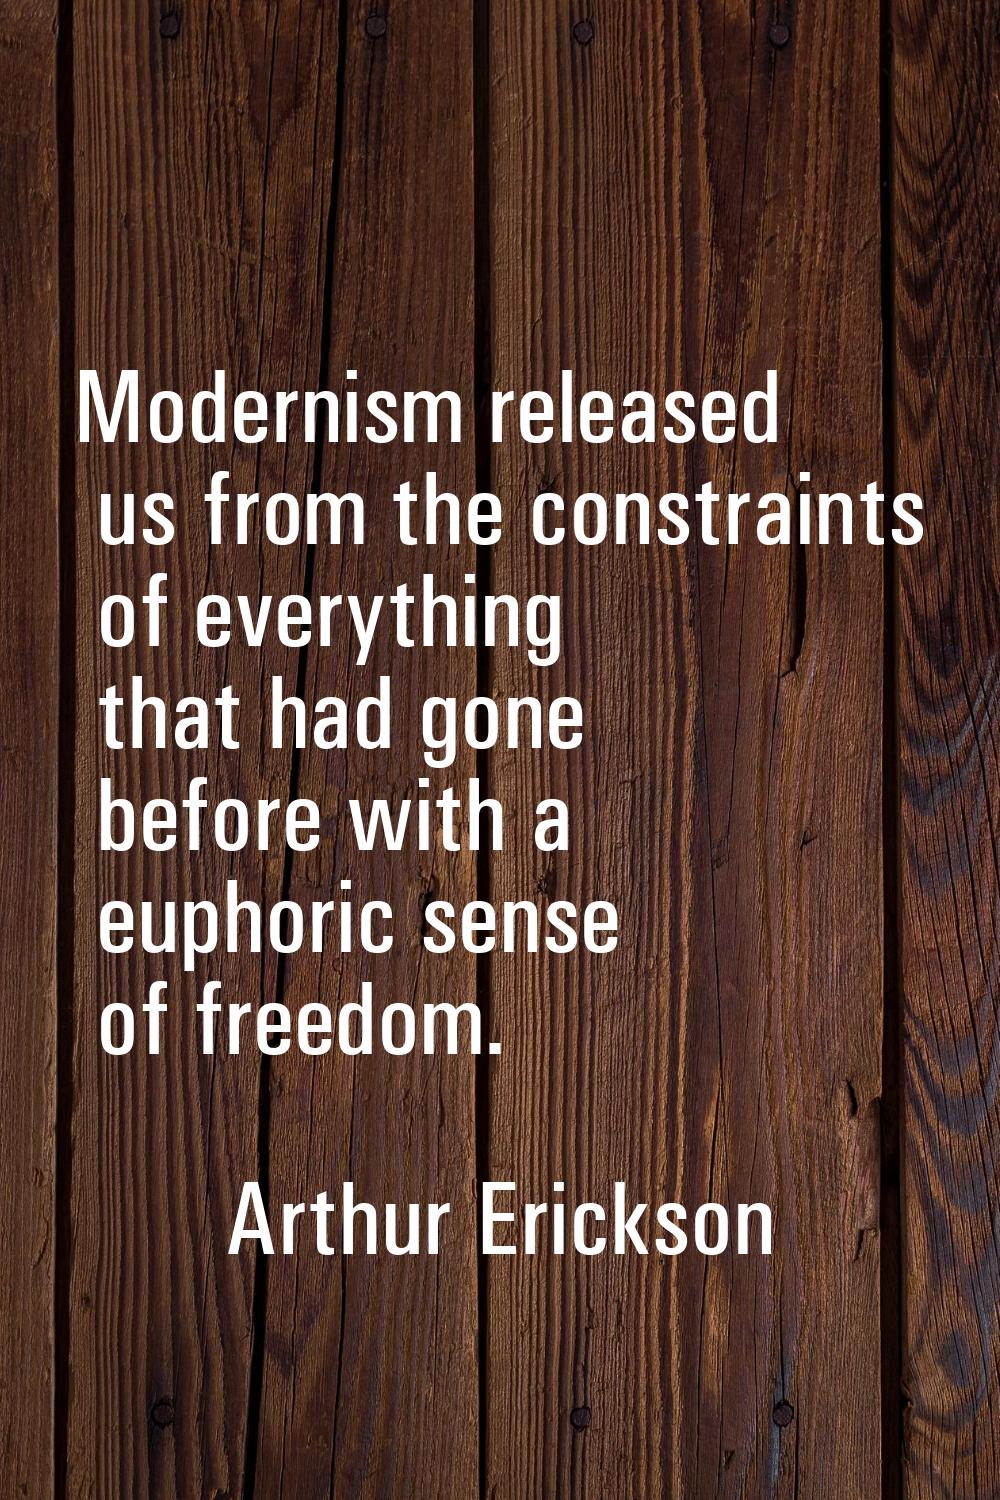 Modernism released us from the constraints of everything that had gone before with a euphoric sense